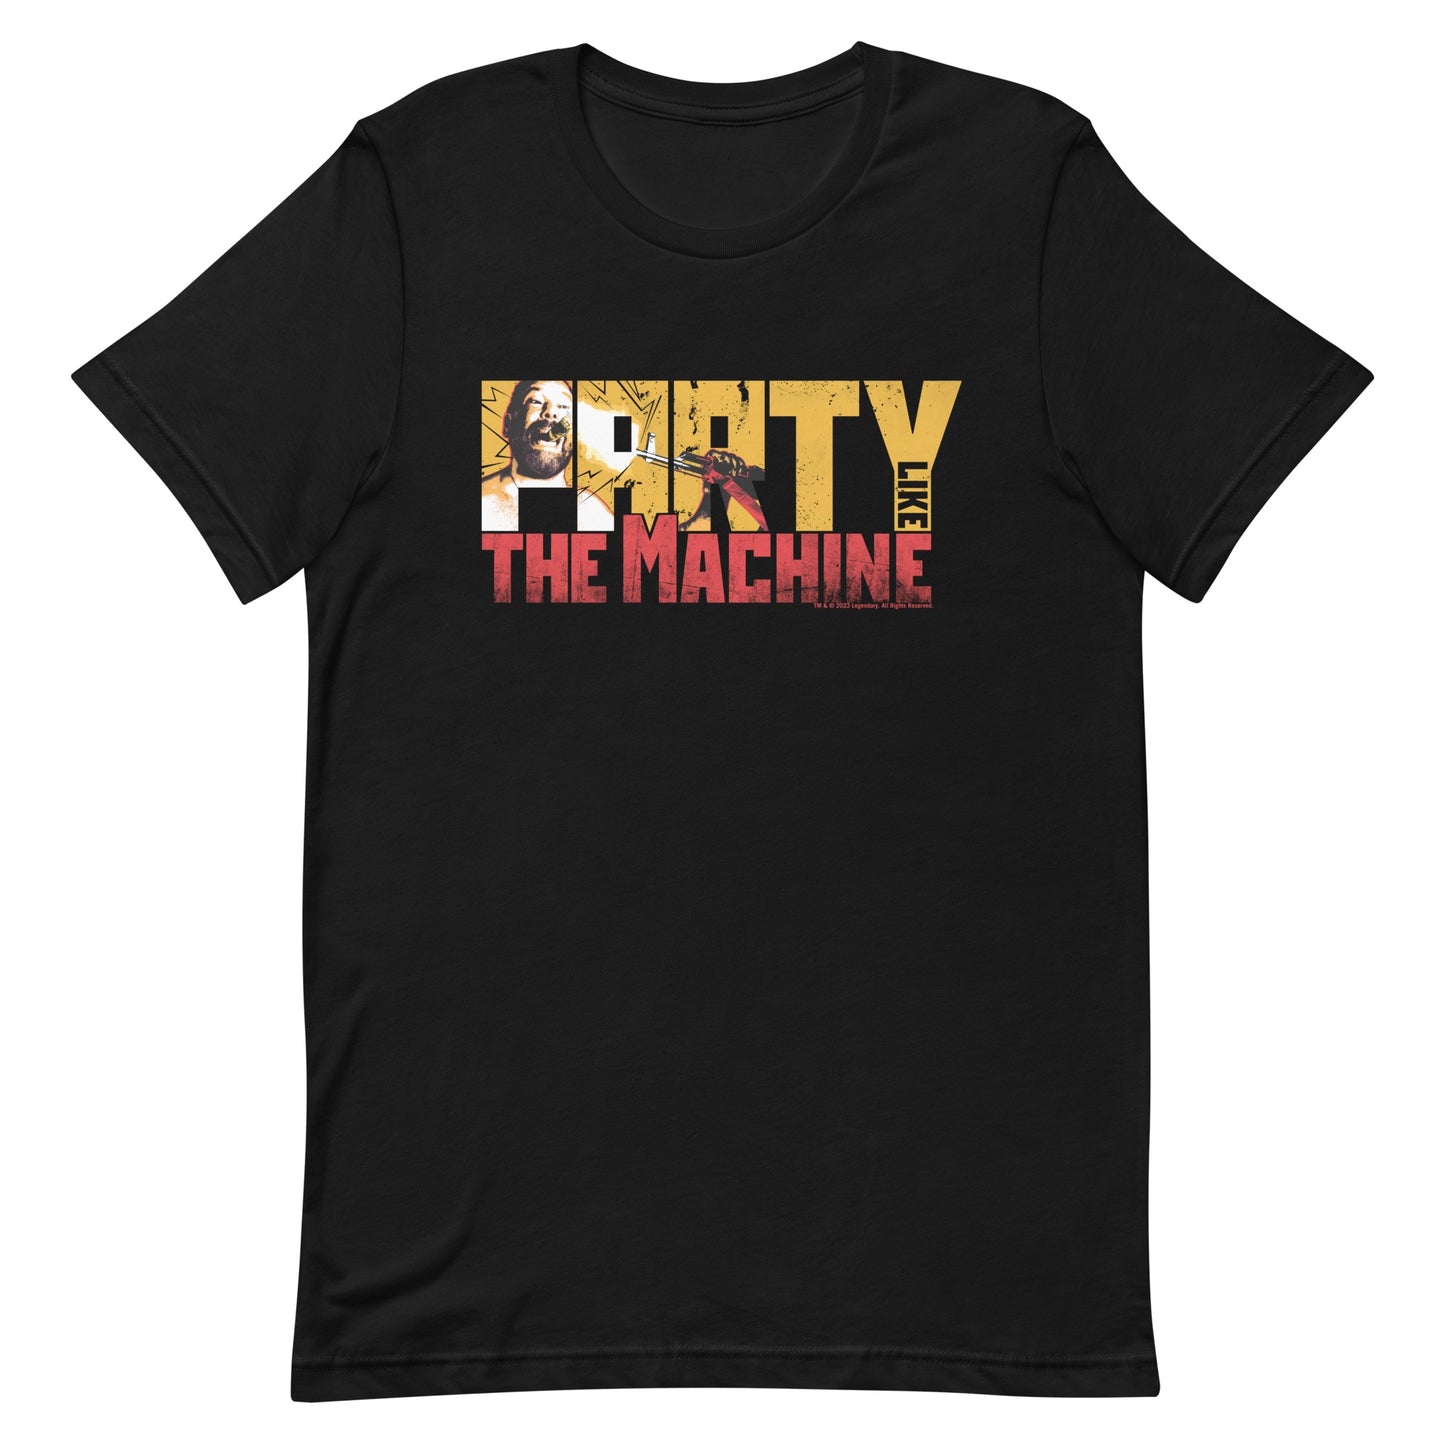 The Machine Party Like The Machine  Adult Short Sleeve T-Shirt